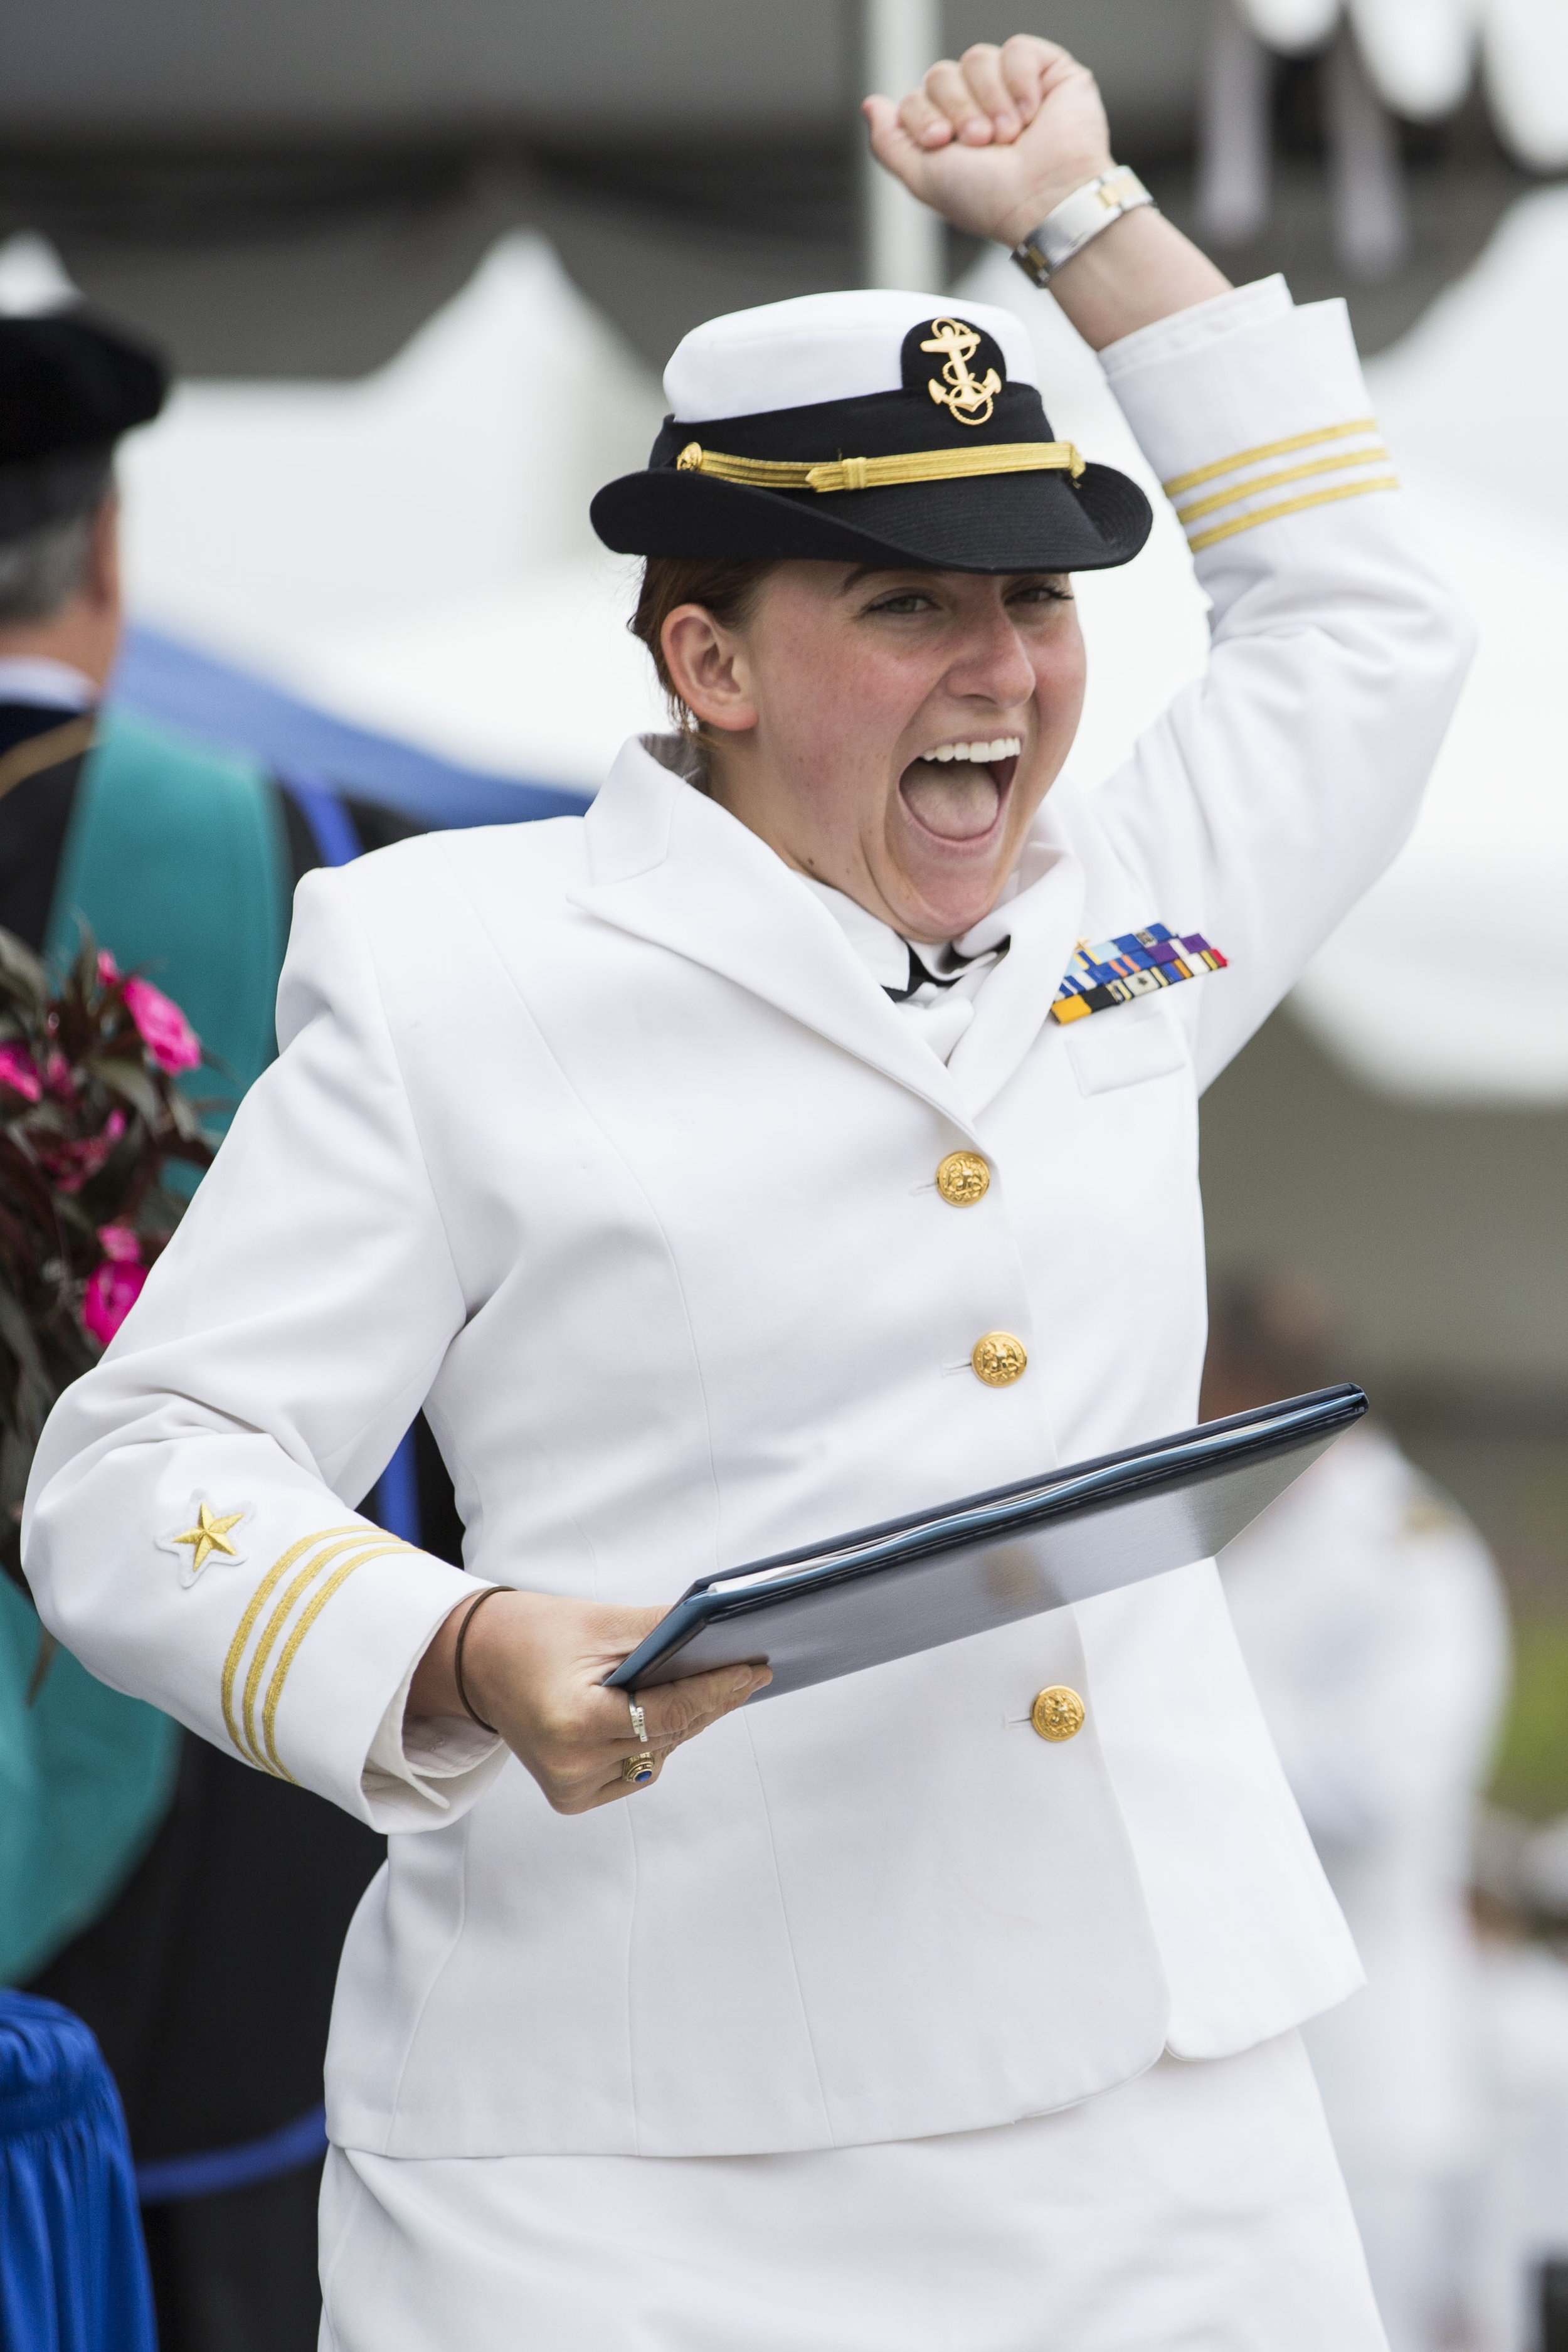  Natalie Lu celebrates after accepting her diploma during the Massachusetts Maritime Academy Commencement ceremony on June 17, 2017. 